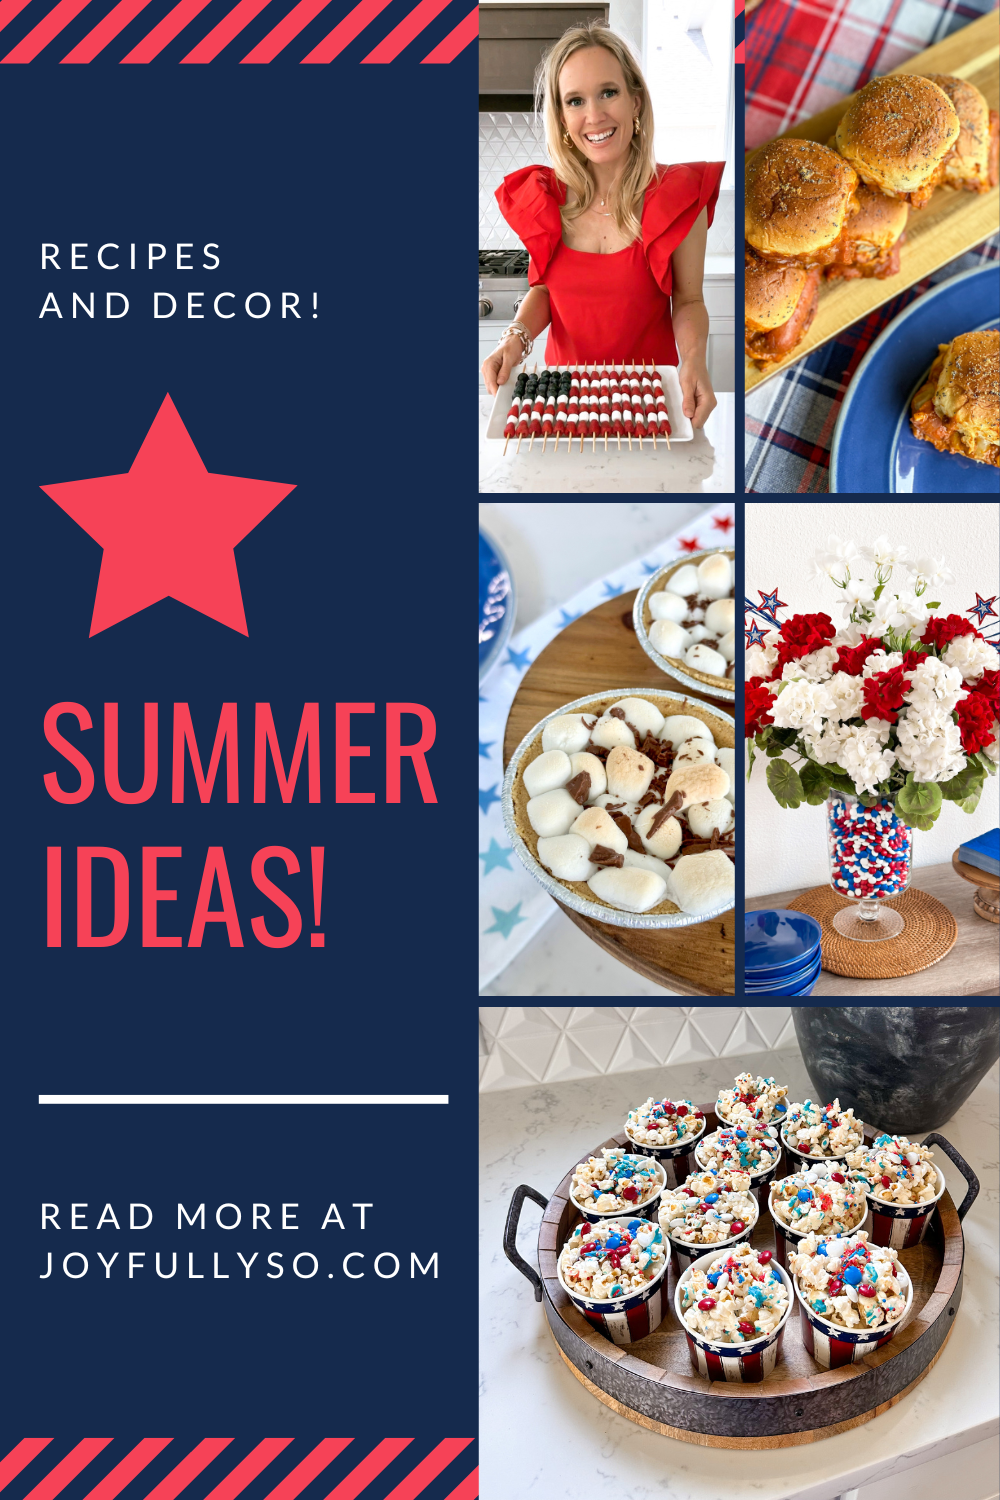 Summer ideas | Summer recipes | Summer decor inspiration | Ideas for summer fun, Fourth of July, Memorial Day Weekend and Labor Day summer holidays | Summer party ideas